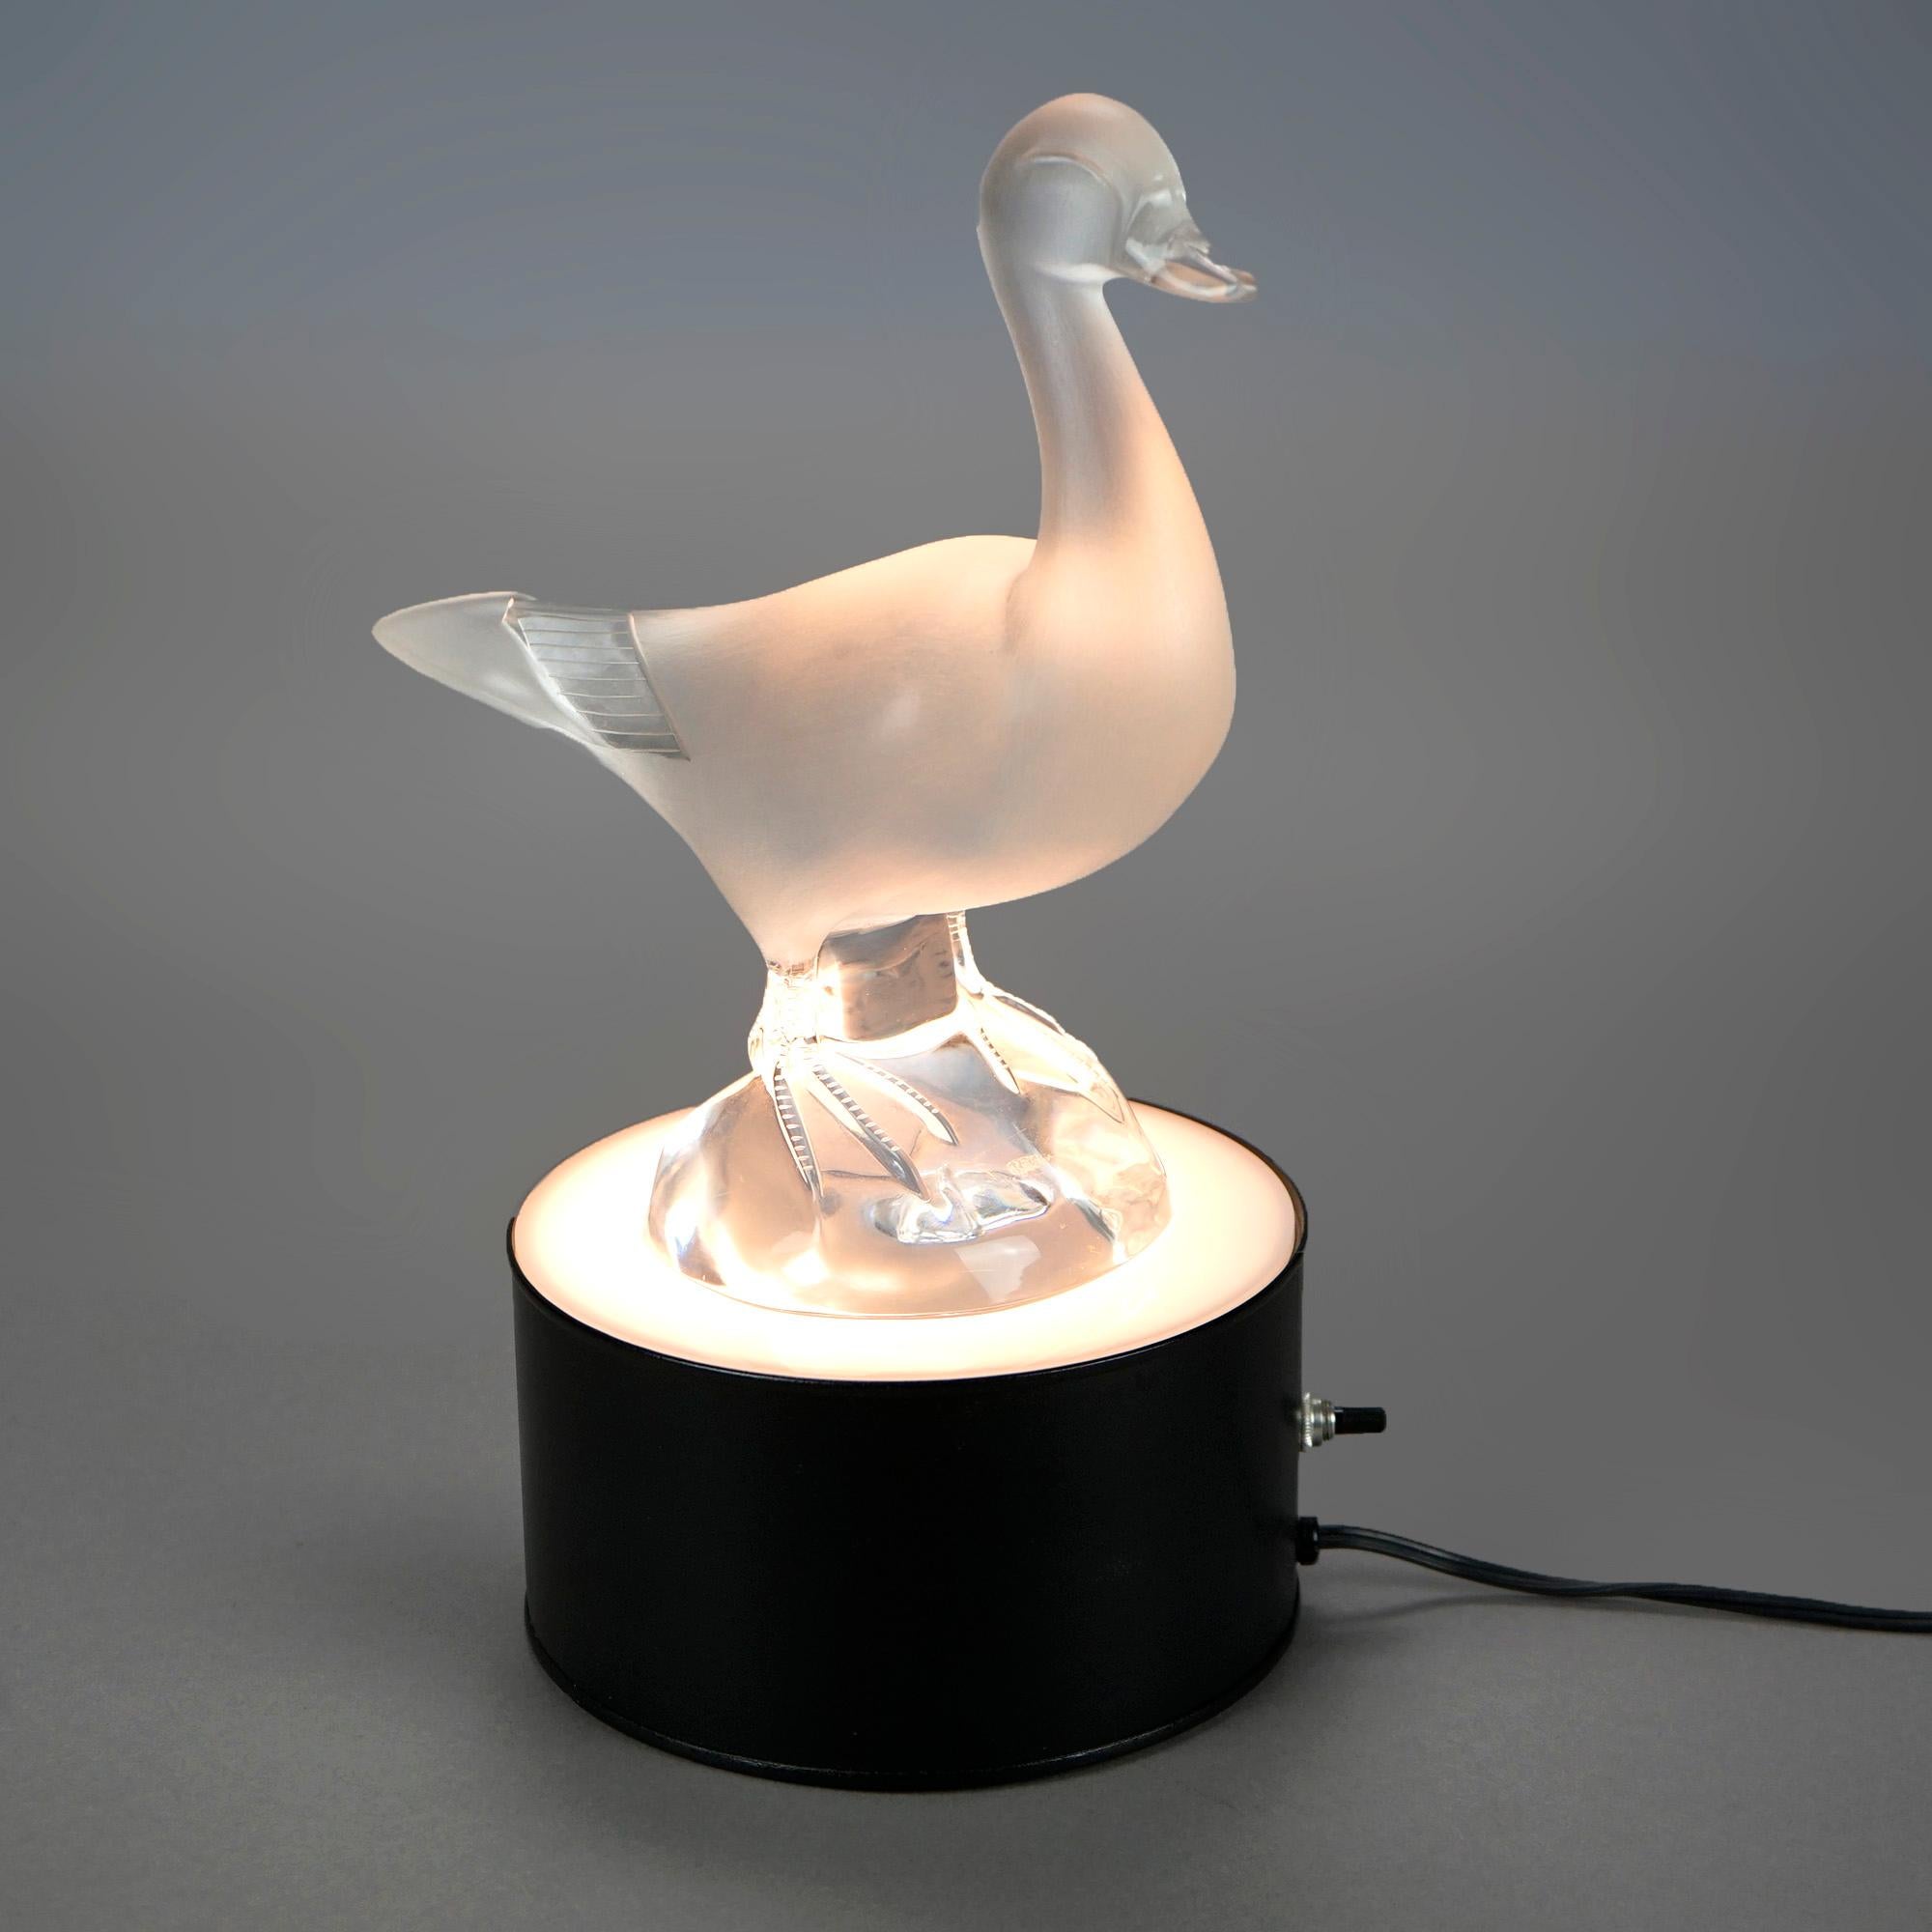 20th Century French Lalique Art Glass Duck Sculpture on Lighted Display, Signed, 20th C